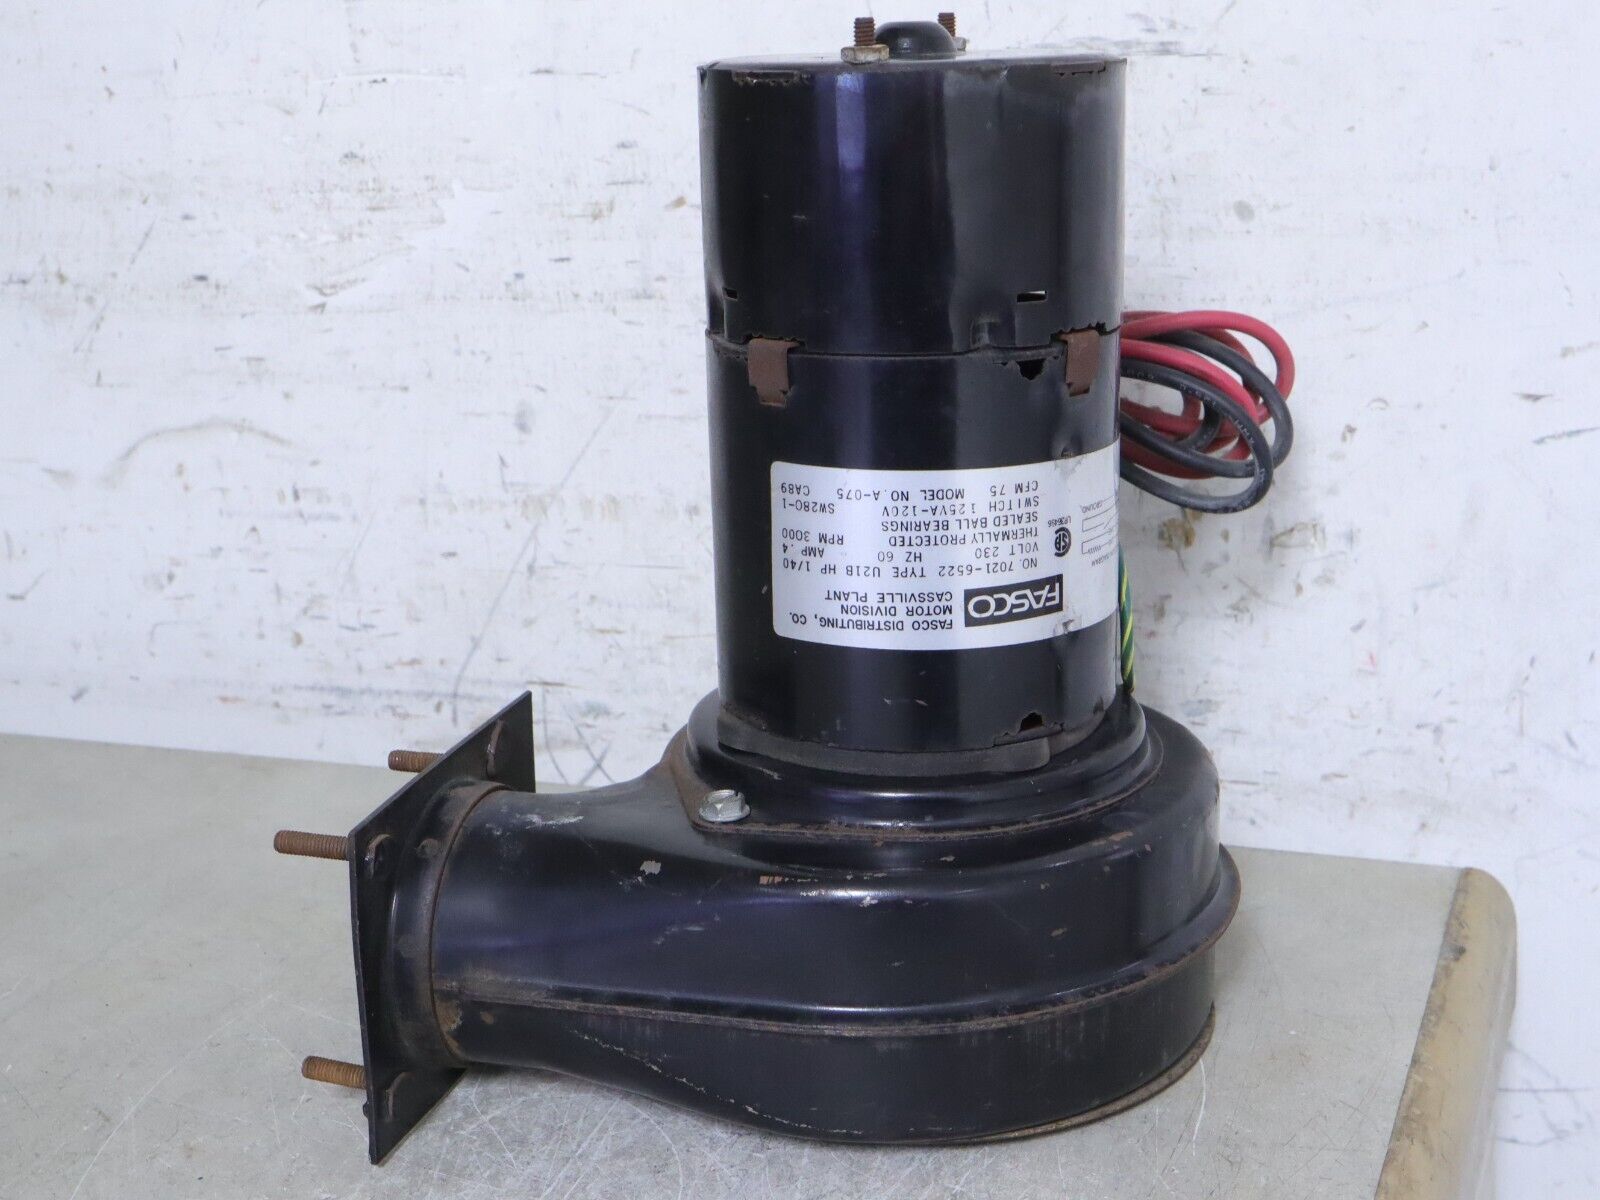 FASCO 7021-6522 Draft Inducer Blower Motor Assembly 230V 1/40HP 3000RPM A-075